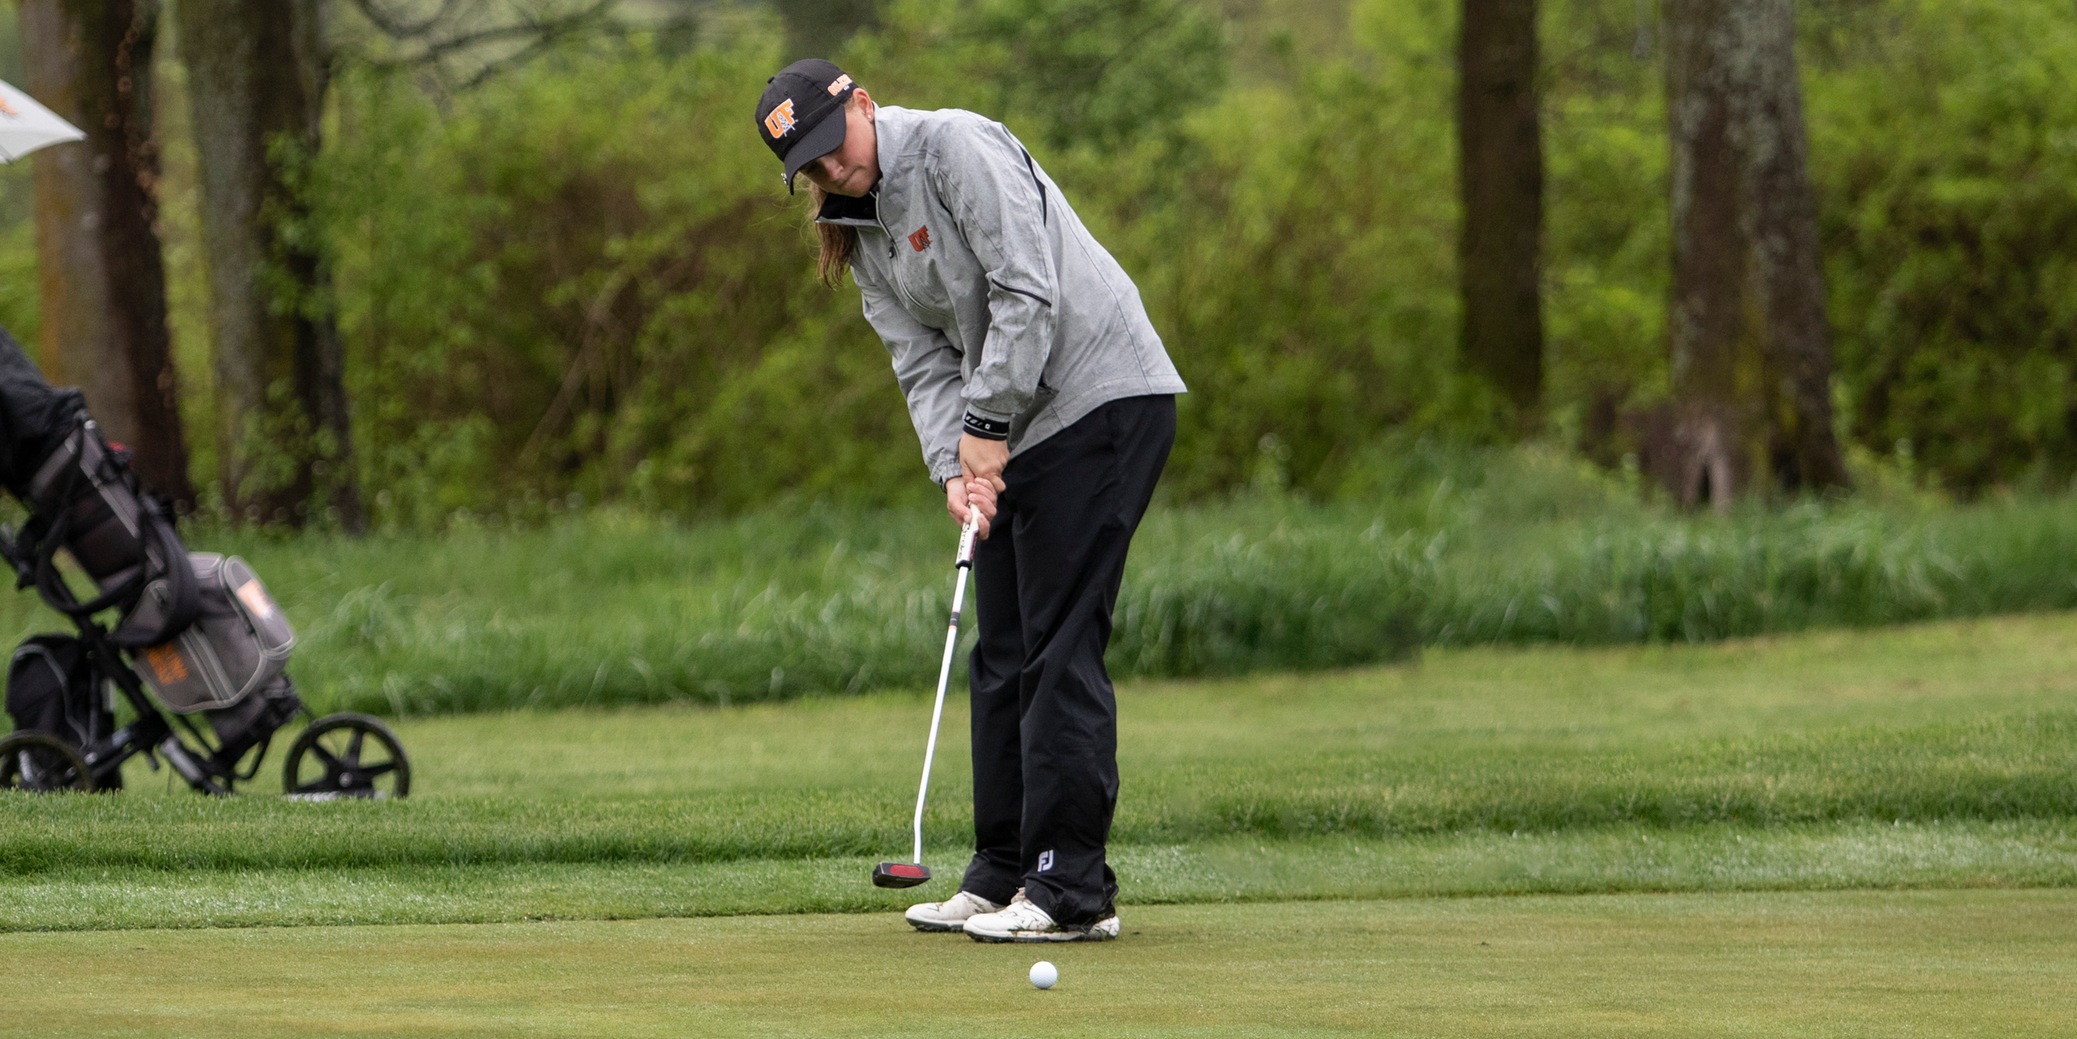 Findlay in First After 36 Holes at G-MAC Championship